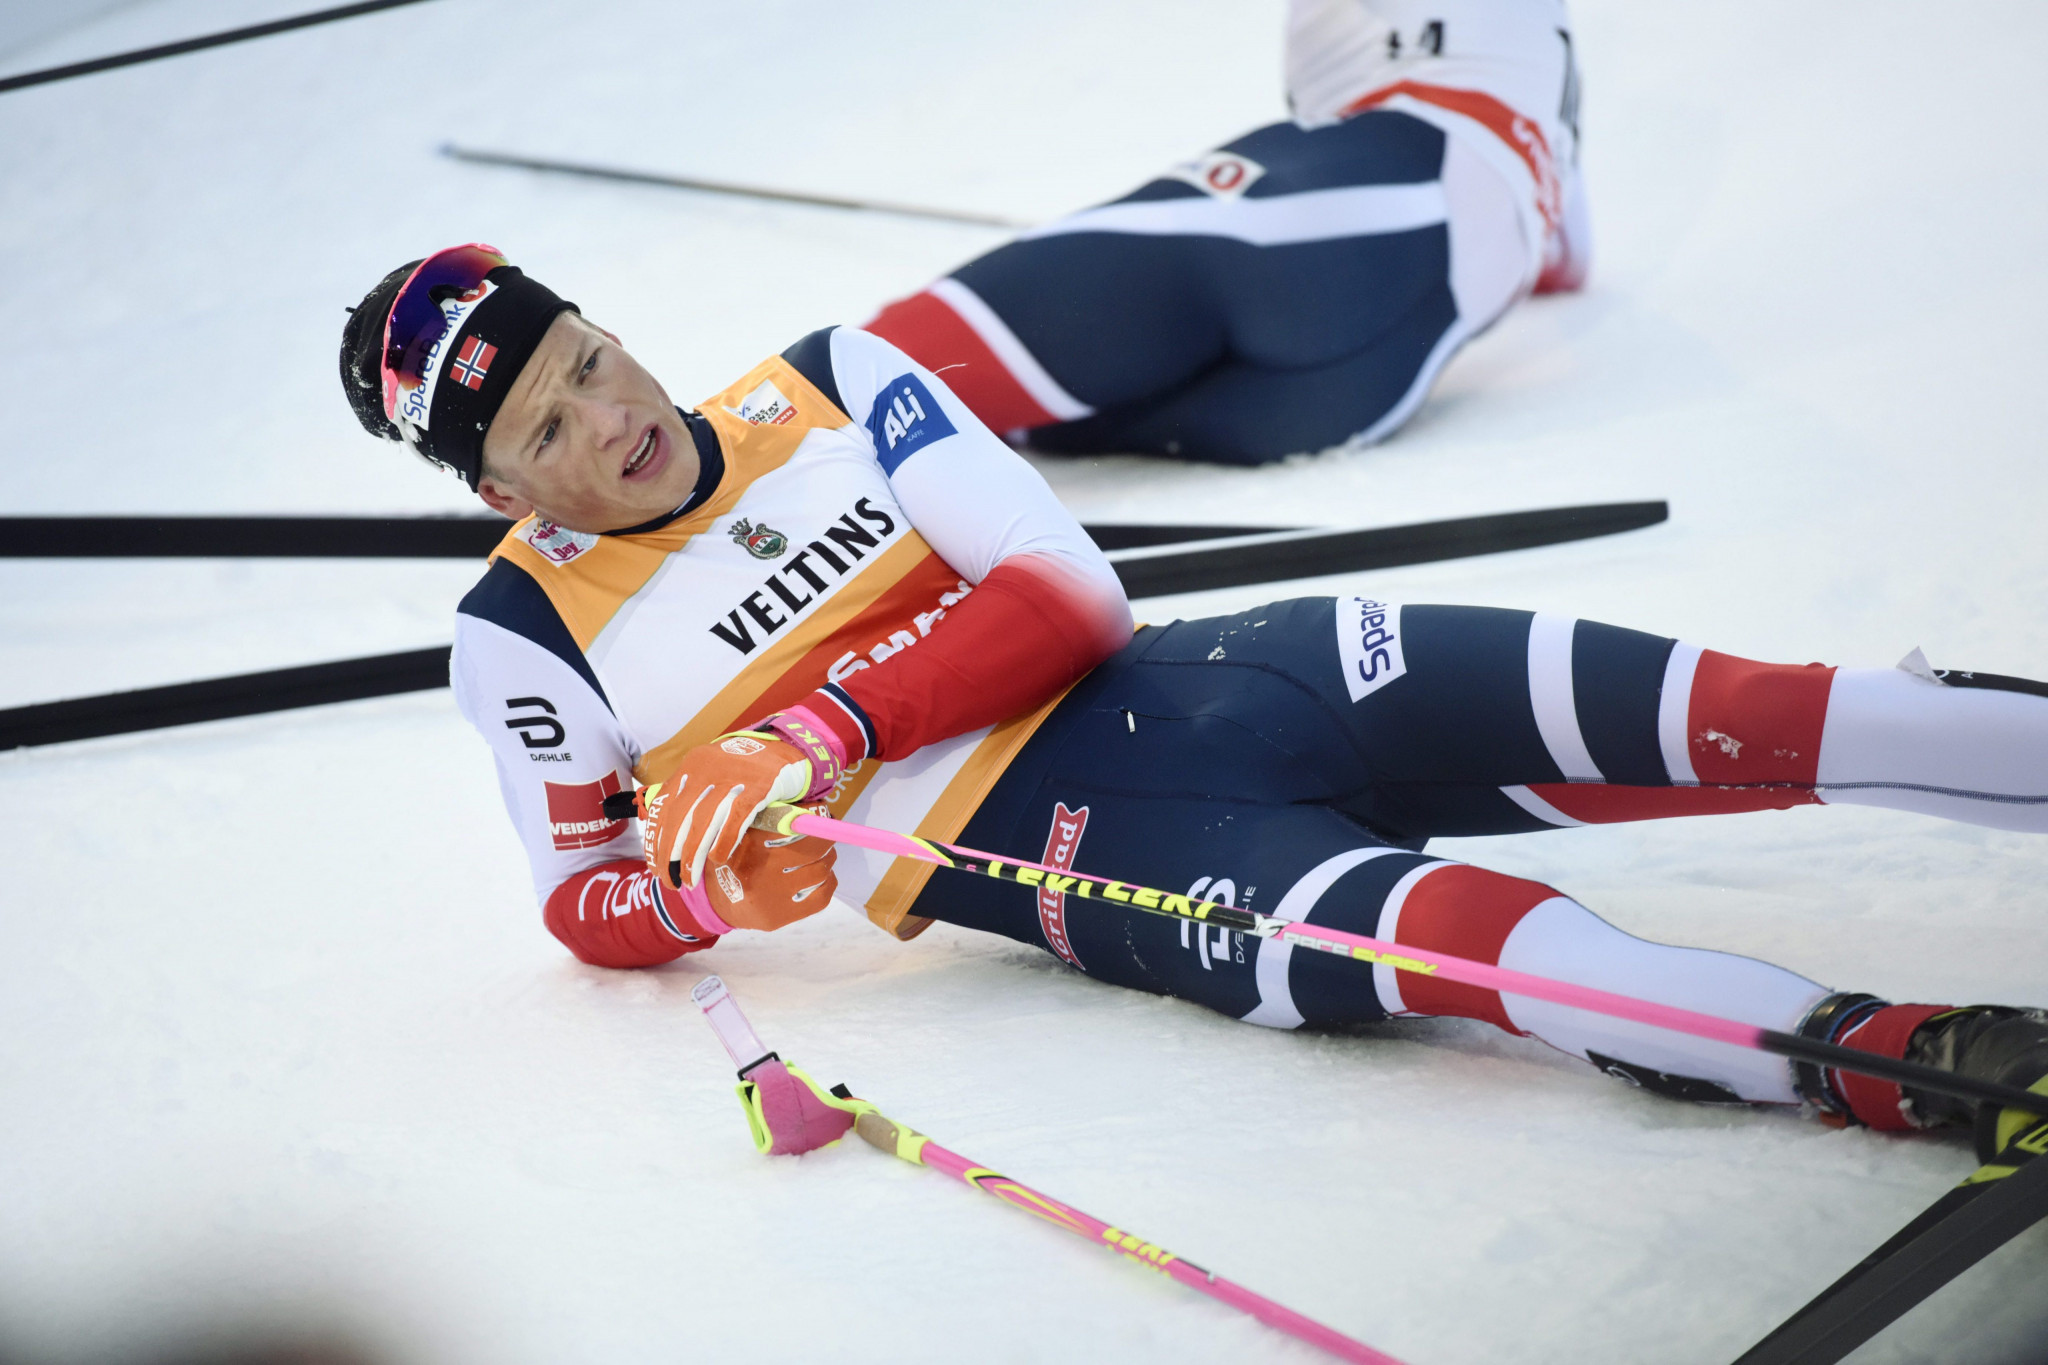 Klaebo continues dominance at FIS Cross Country World Cup in Ruka